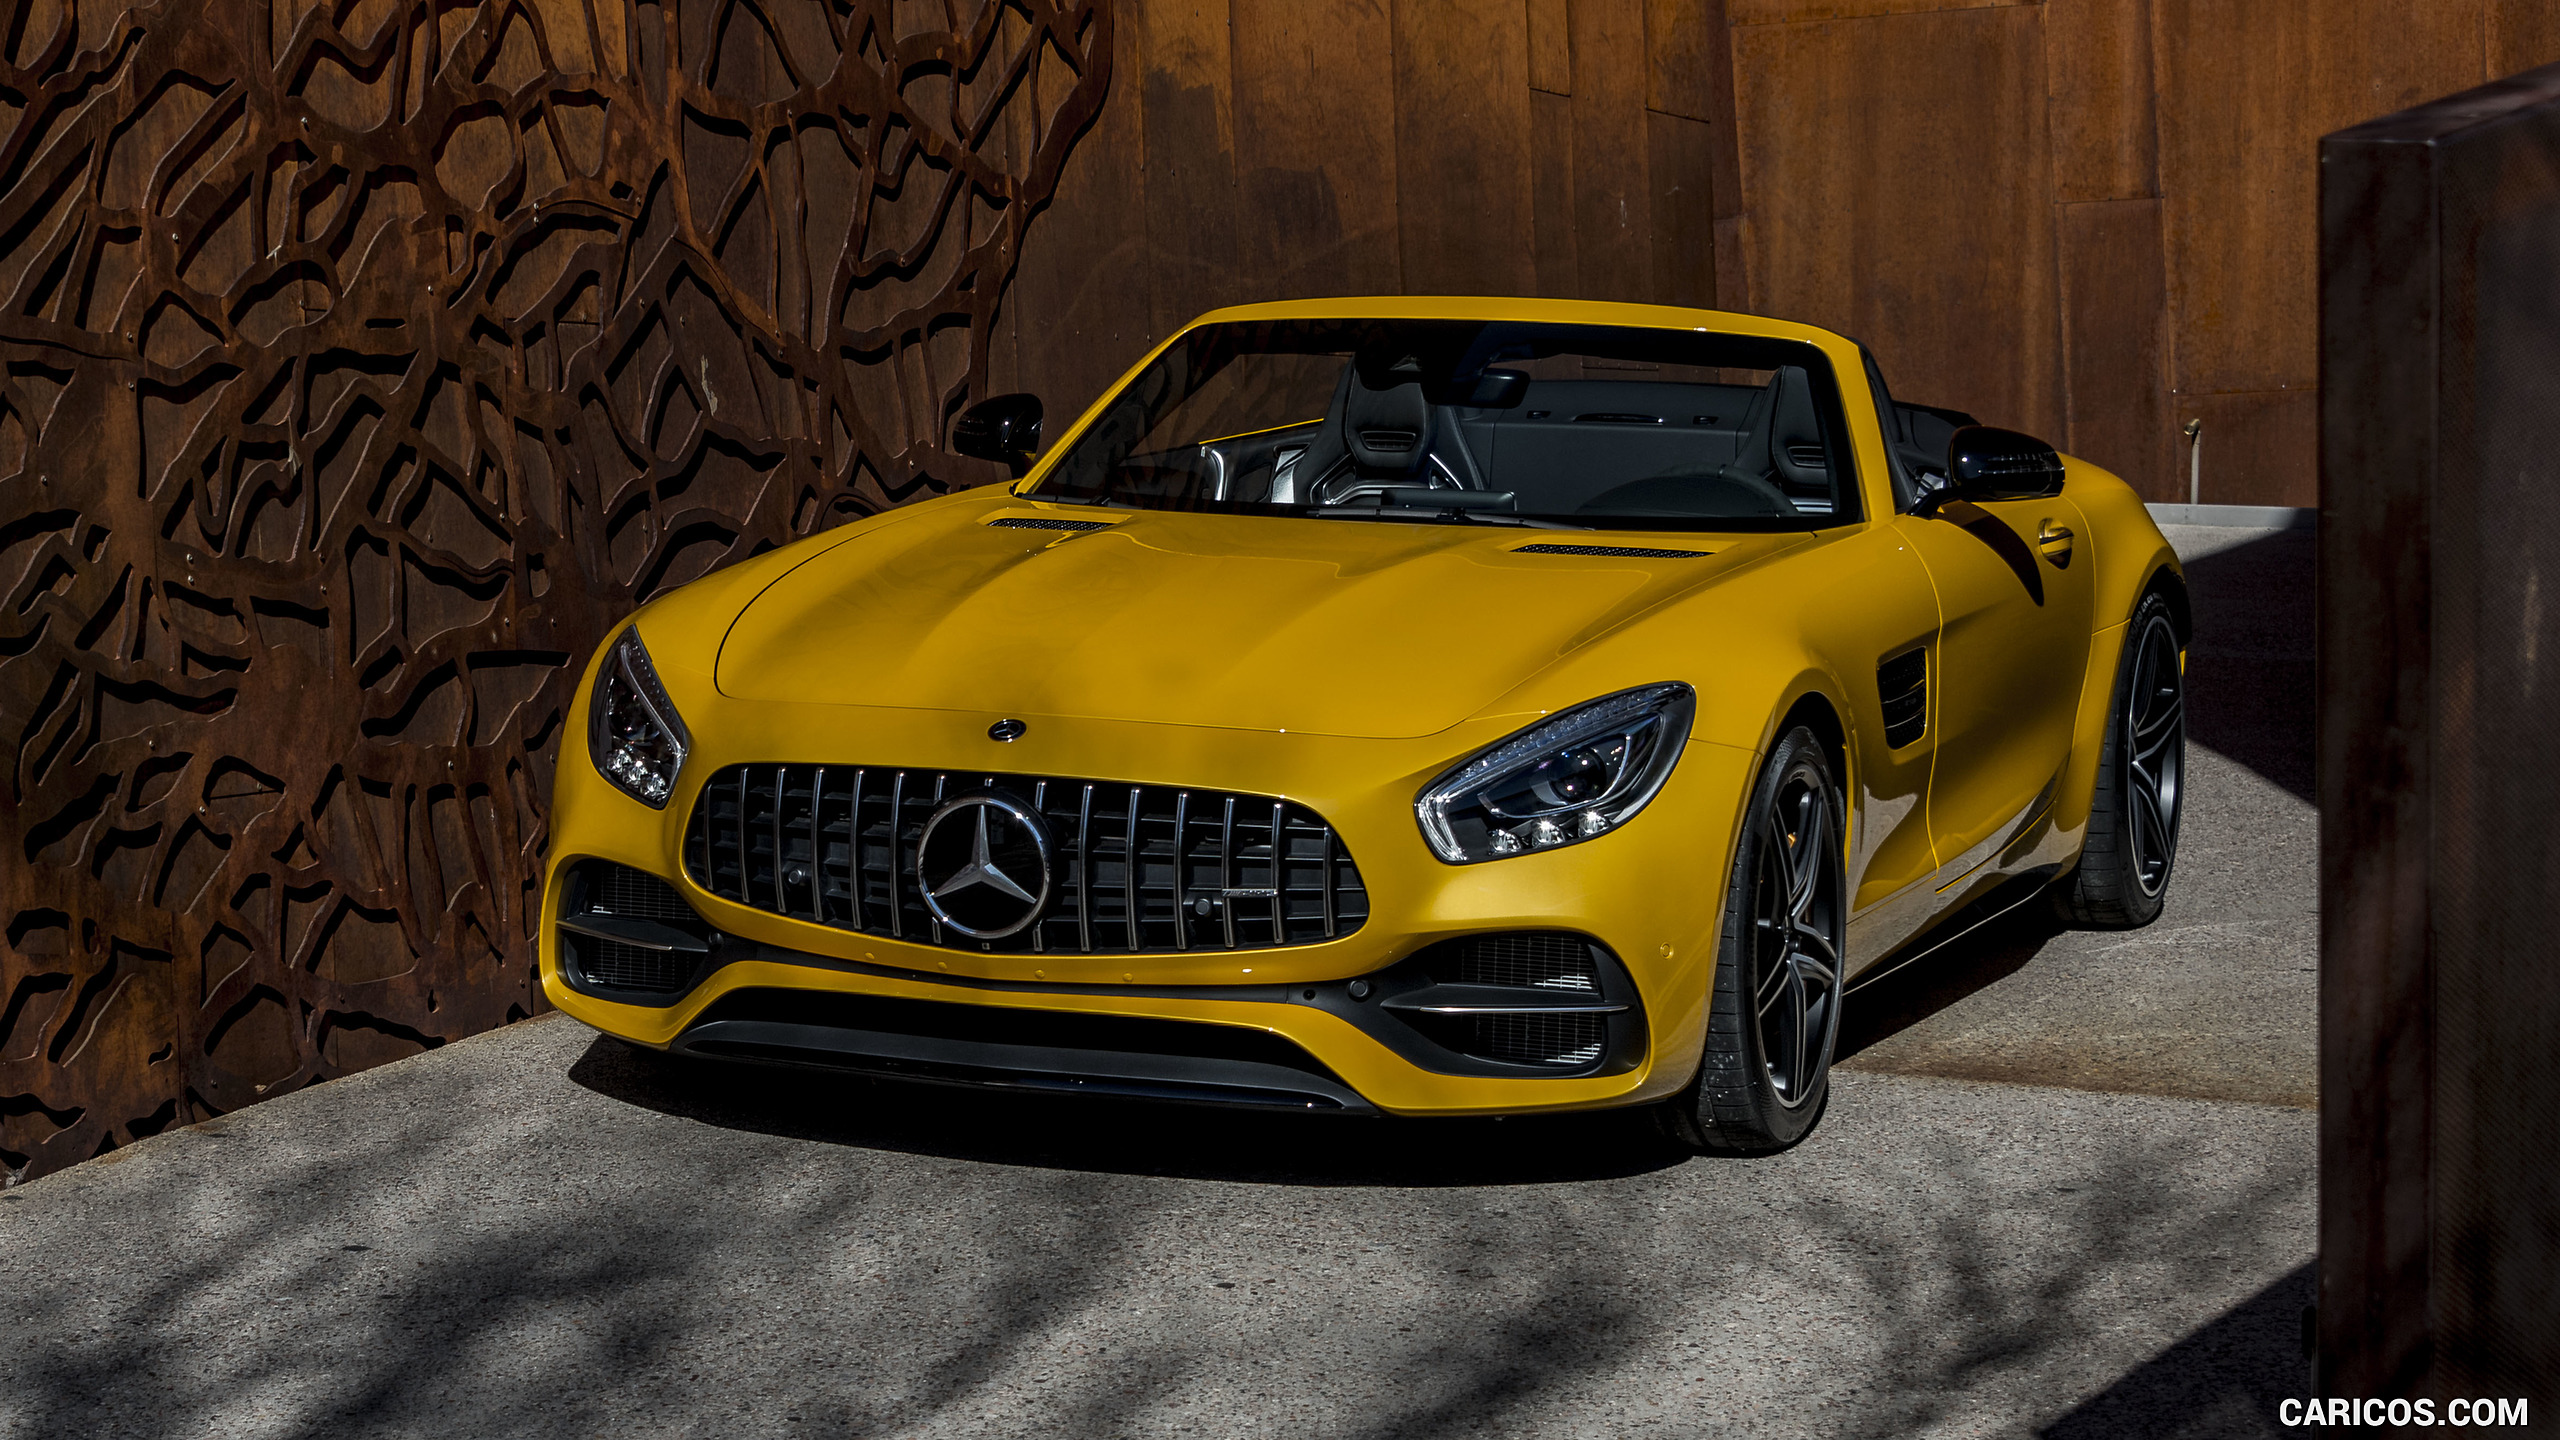 2018 Mercedes-AMG GT C Roadster - Front, #246 of 350